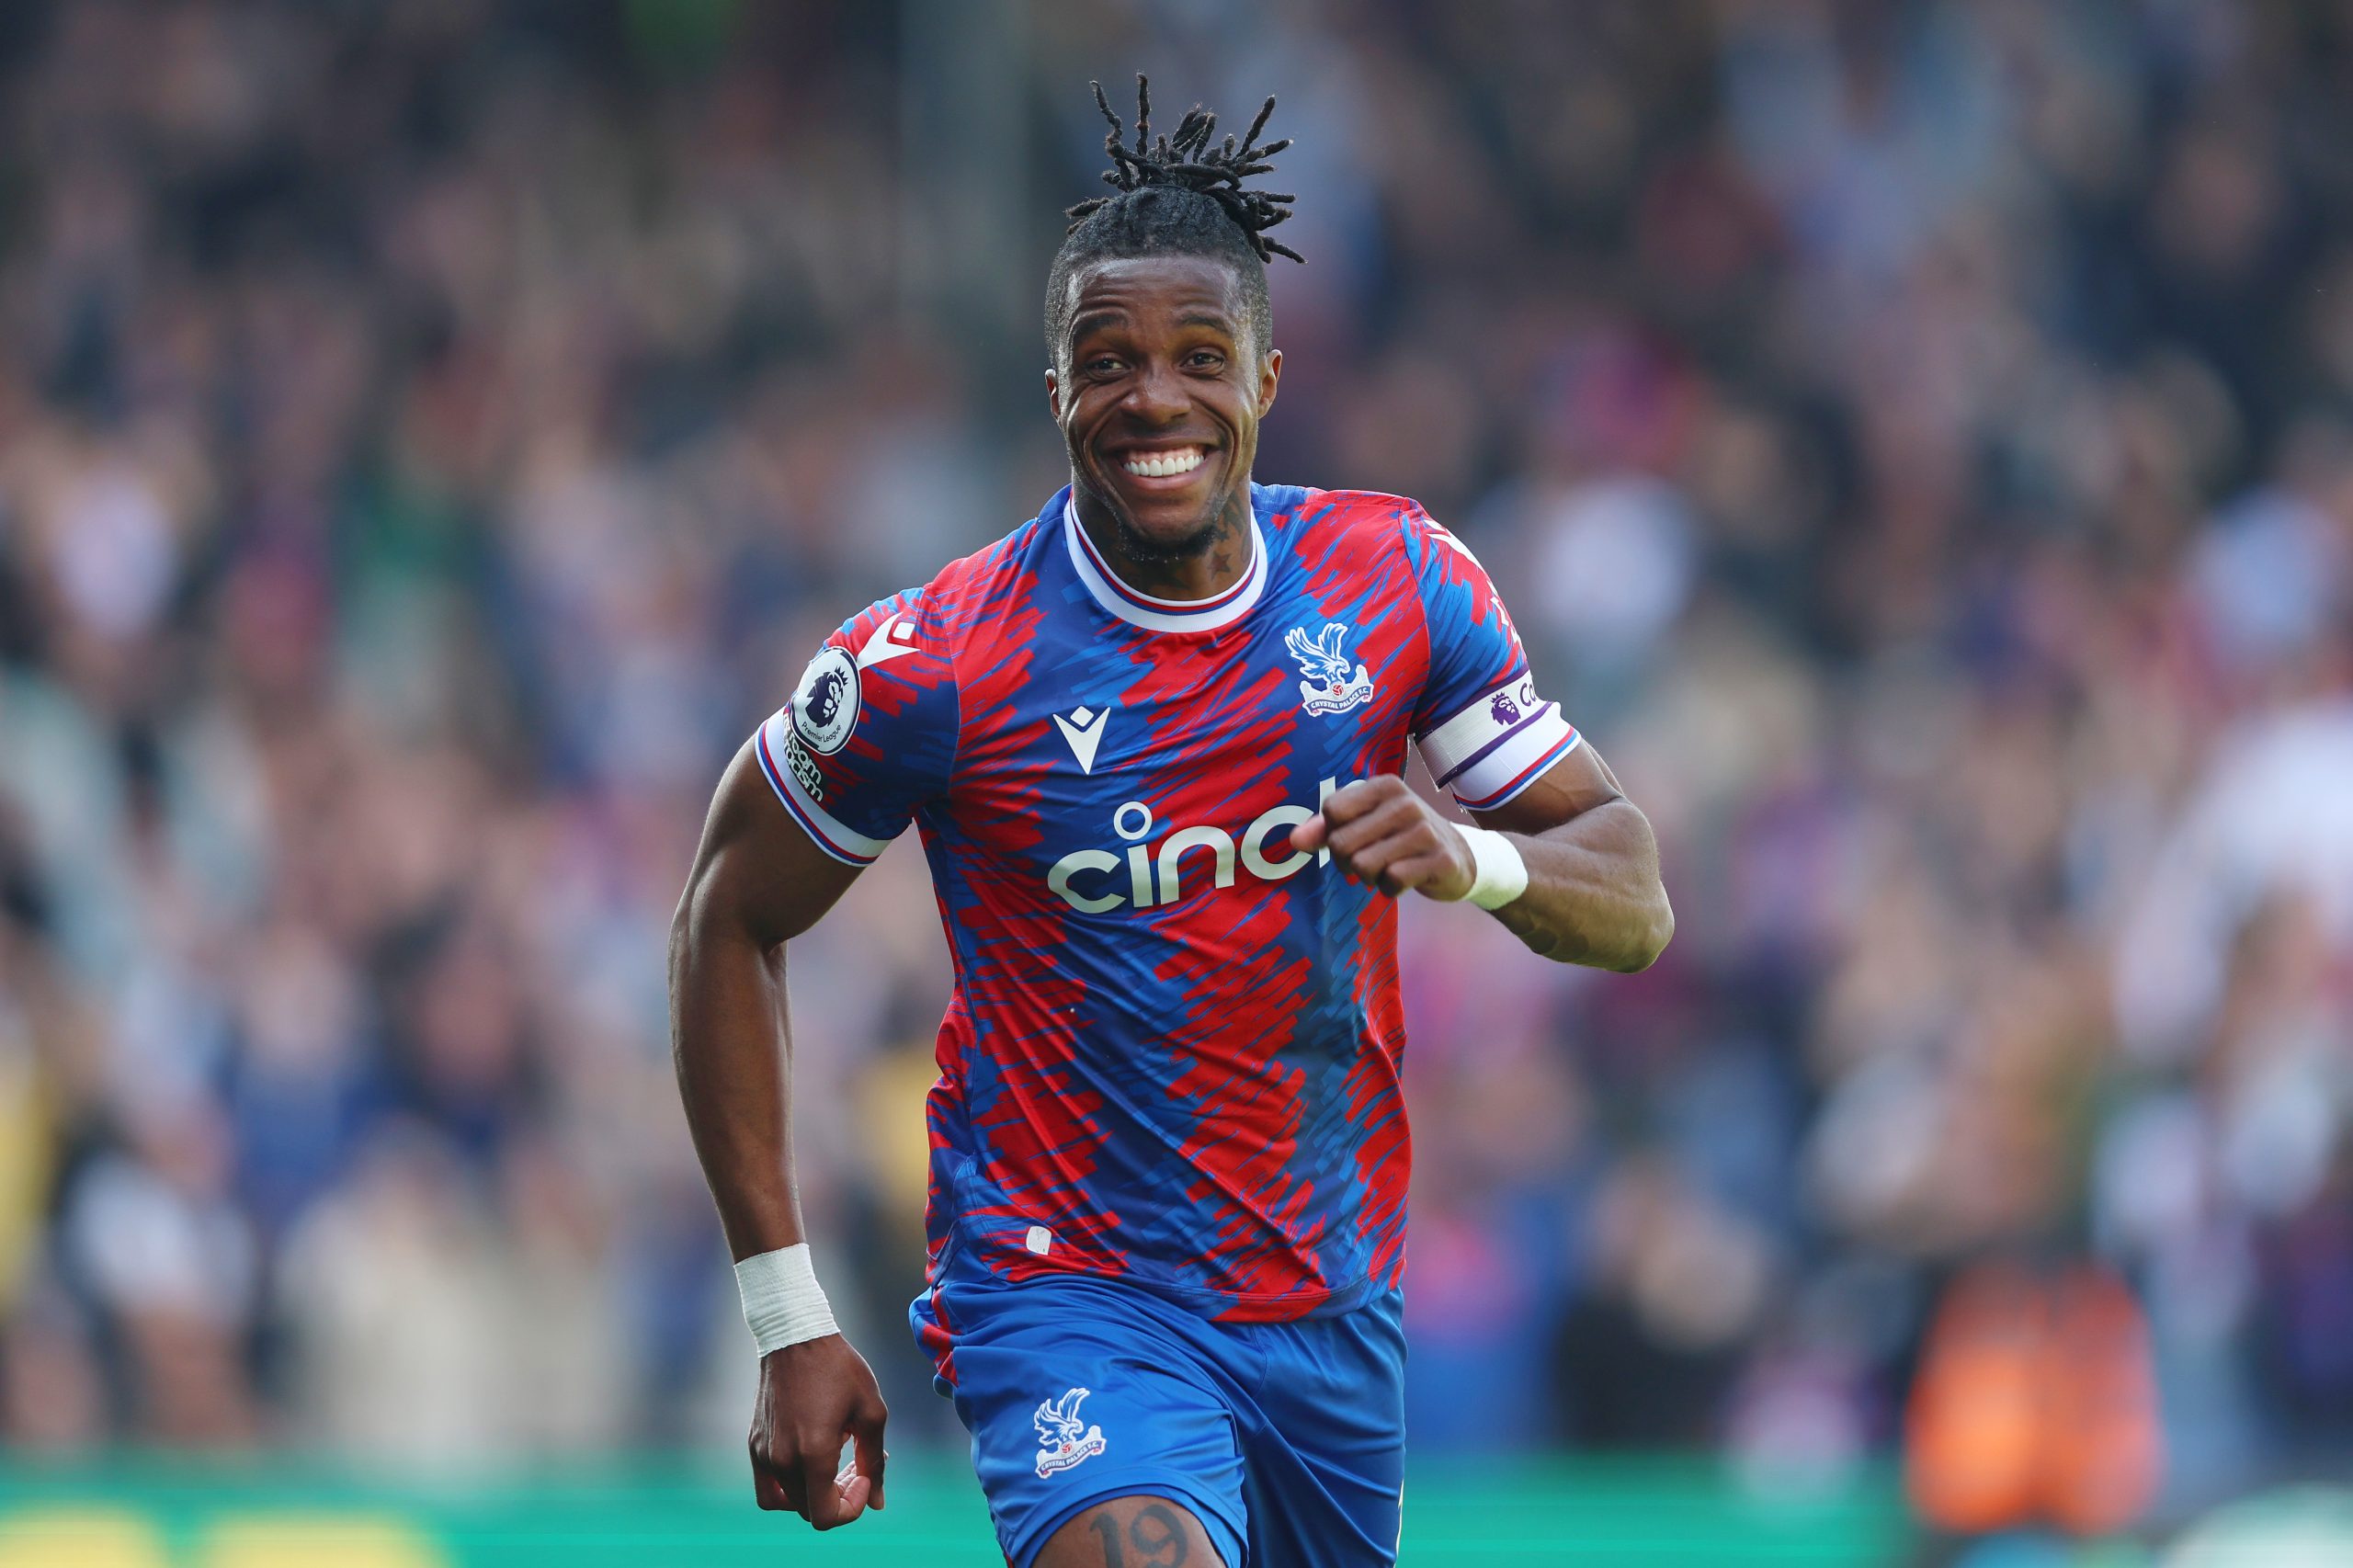 Tottenham Hotspur-linked Wilfried Zaha offered massive new contract by Crystal Palace.